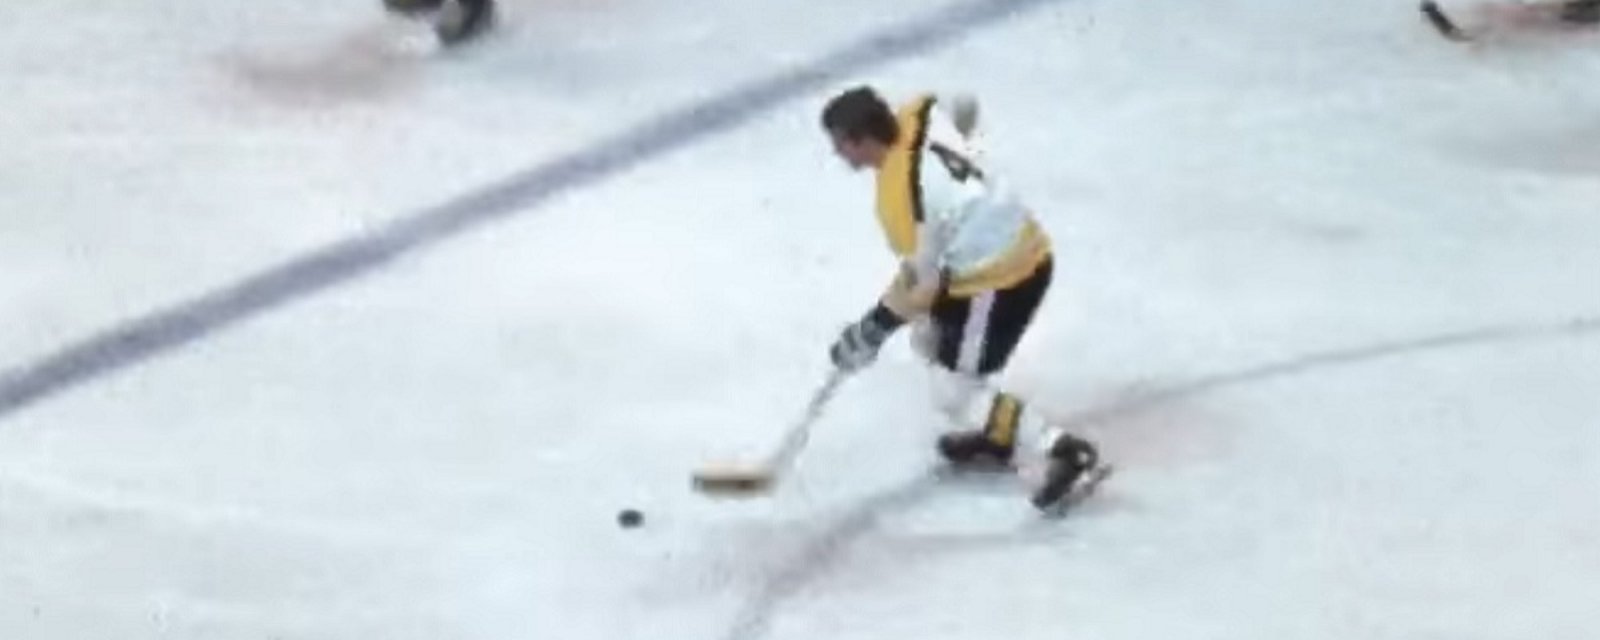 50 years ago today, legendary NHL defenseman Bobby Orr records 100 points in a single season.